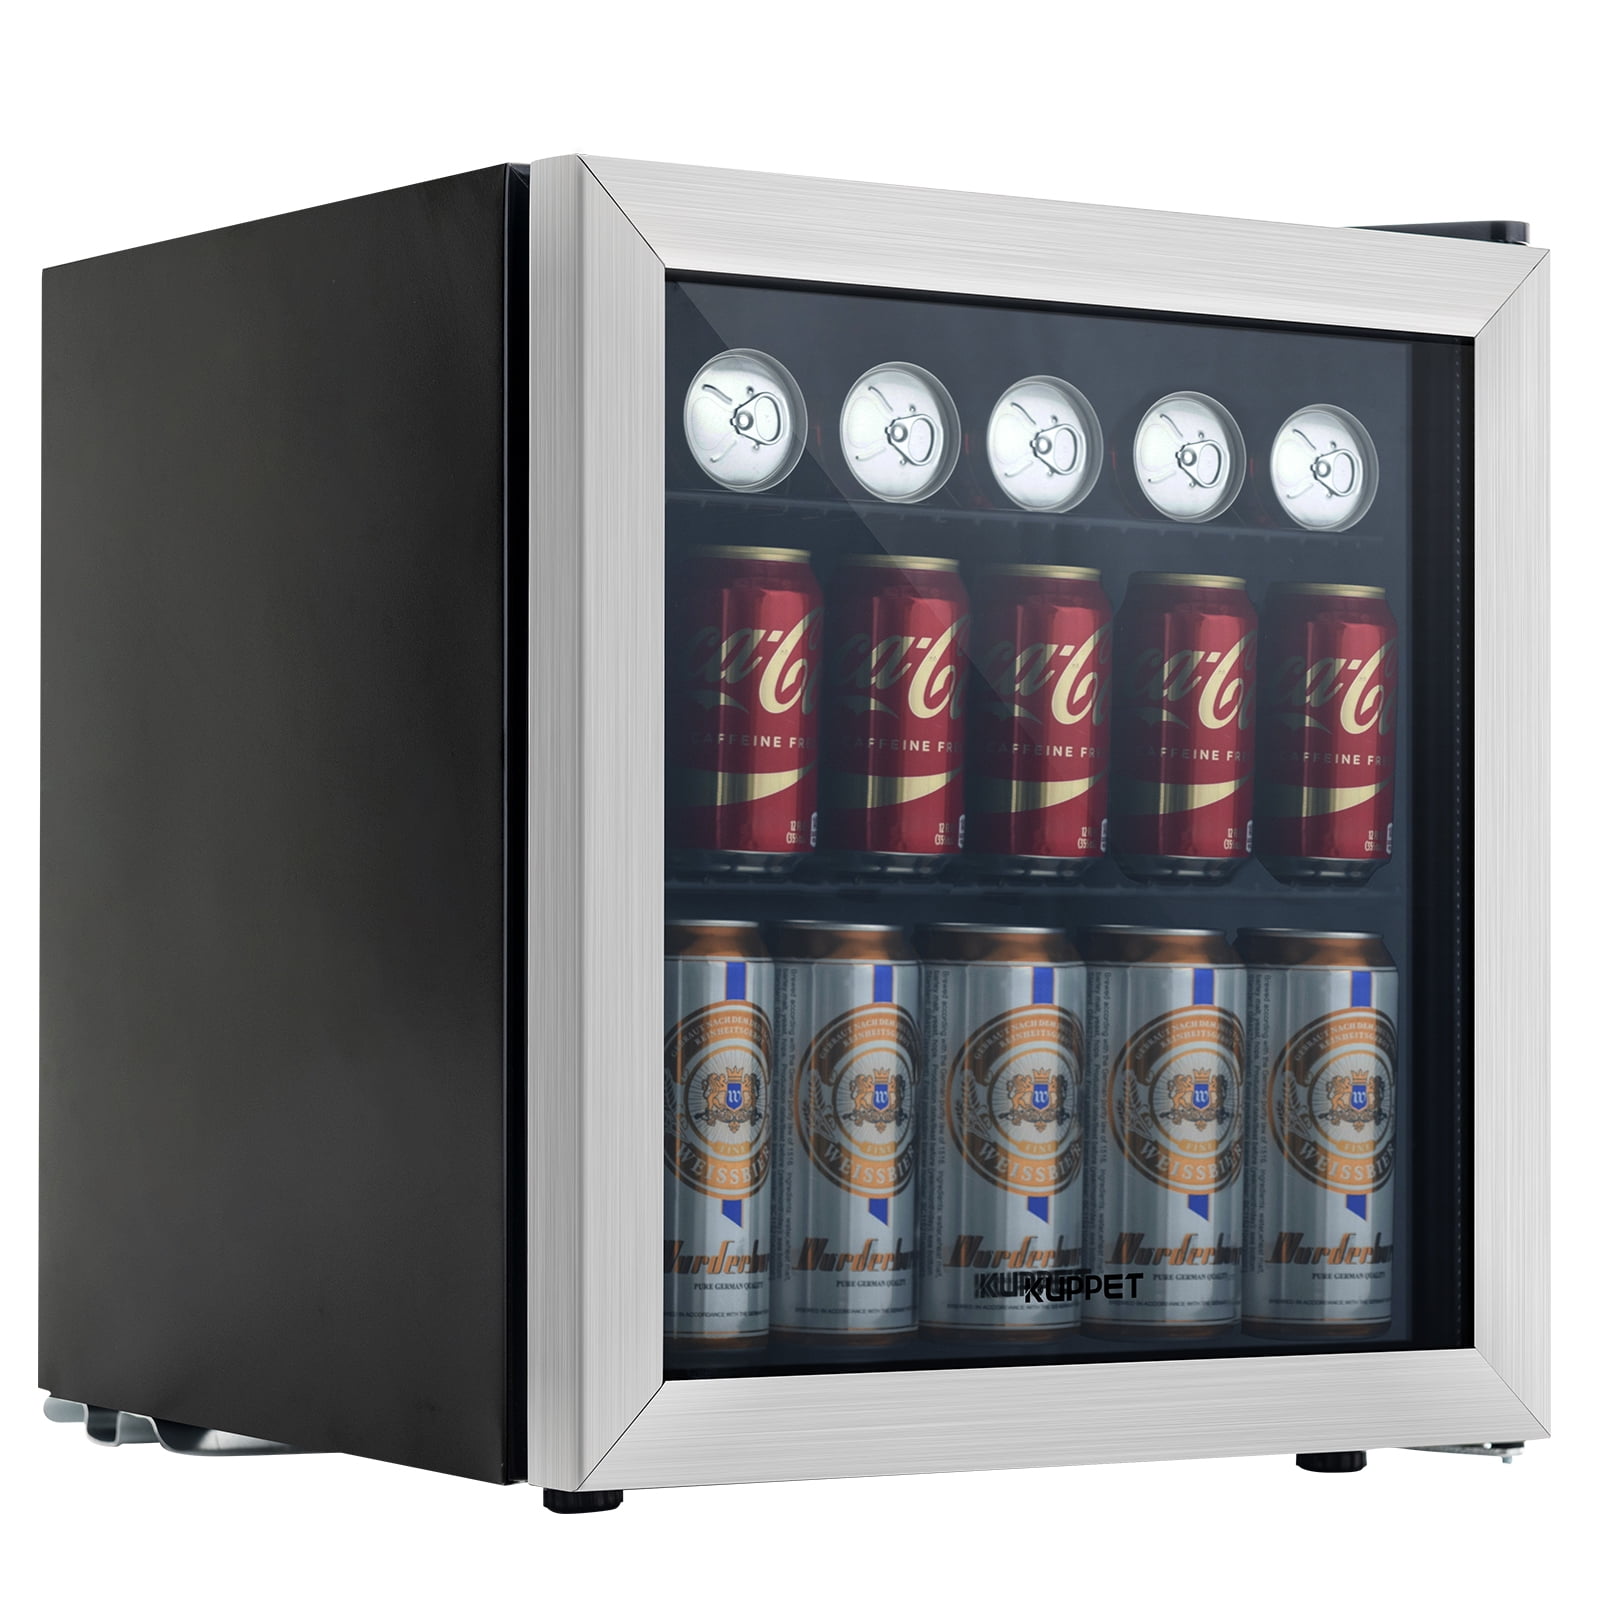 KUPPET 62-Can Beverage Cooler and Refrigerator, Small Mini Fridge with ...